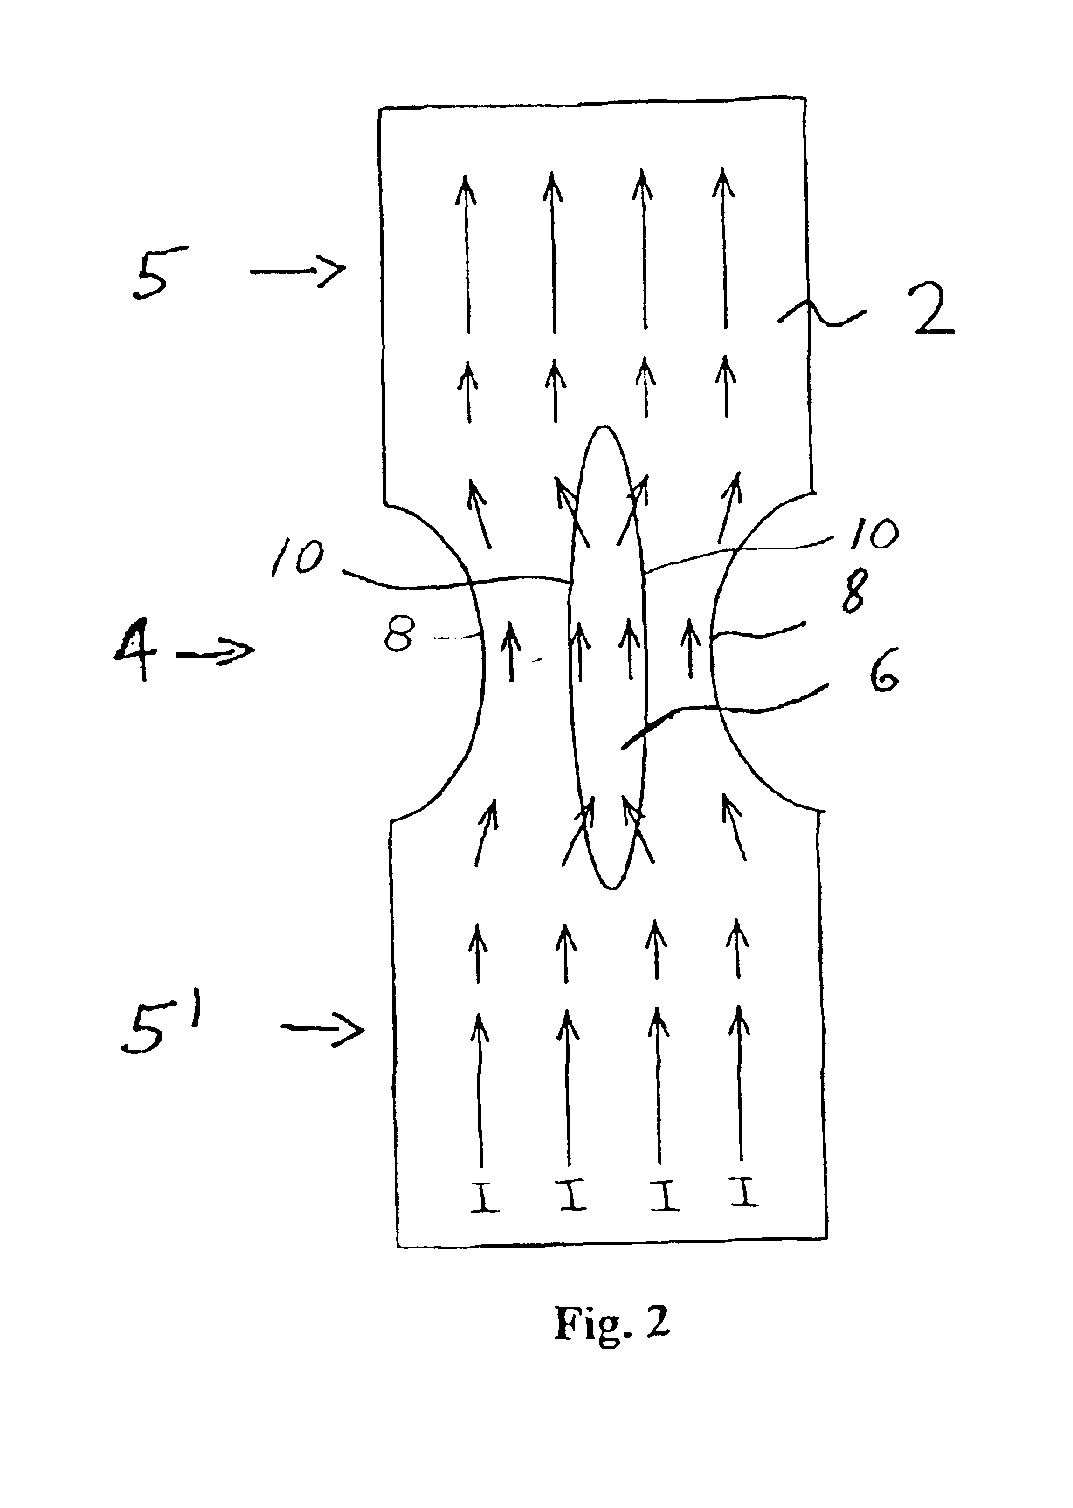 Areal electric conductor comprising a constriction